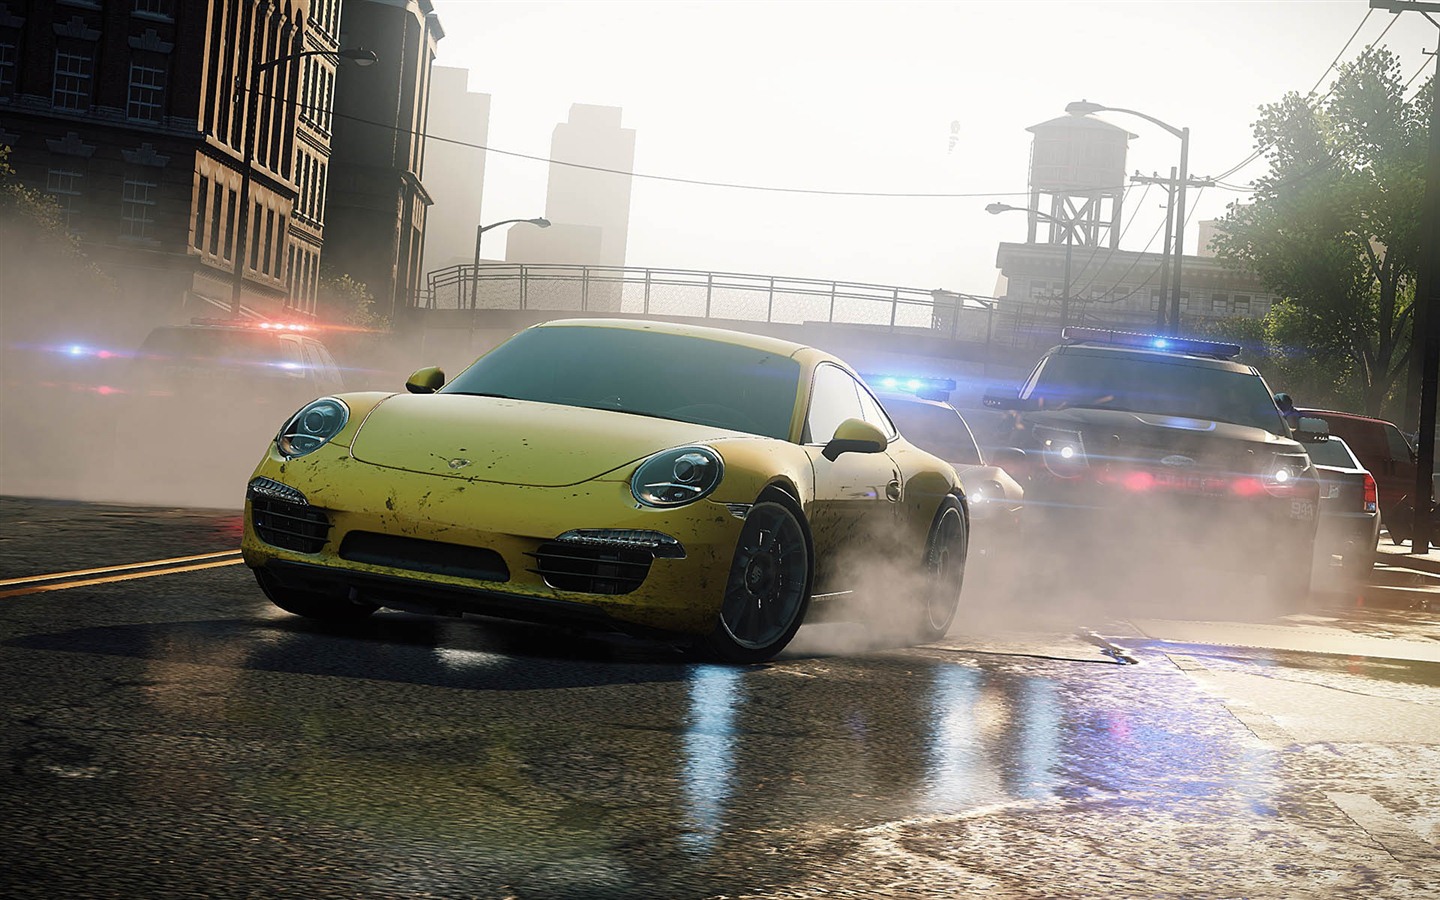 Need for Speed: Most Wanted 极品飞车17：最高通缉 高清壁纸18 - 1440x900